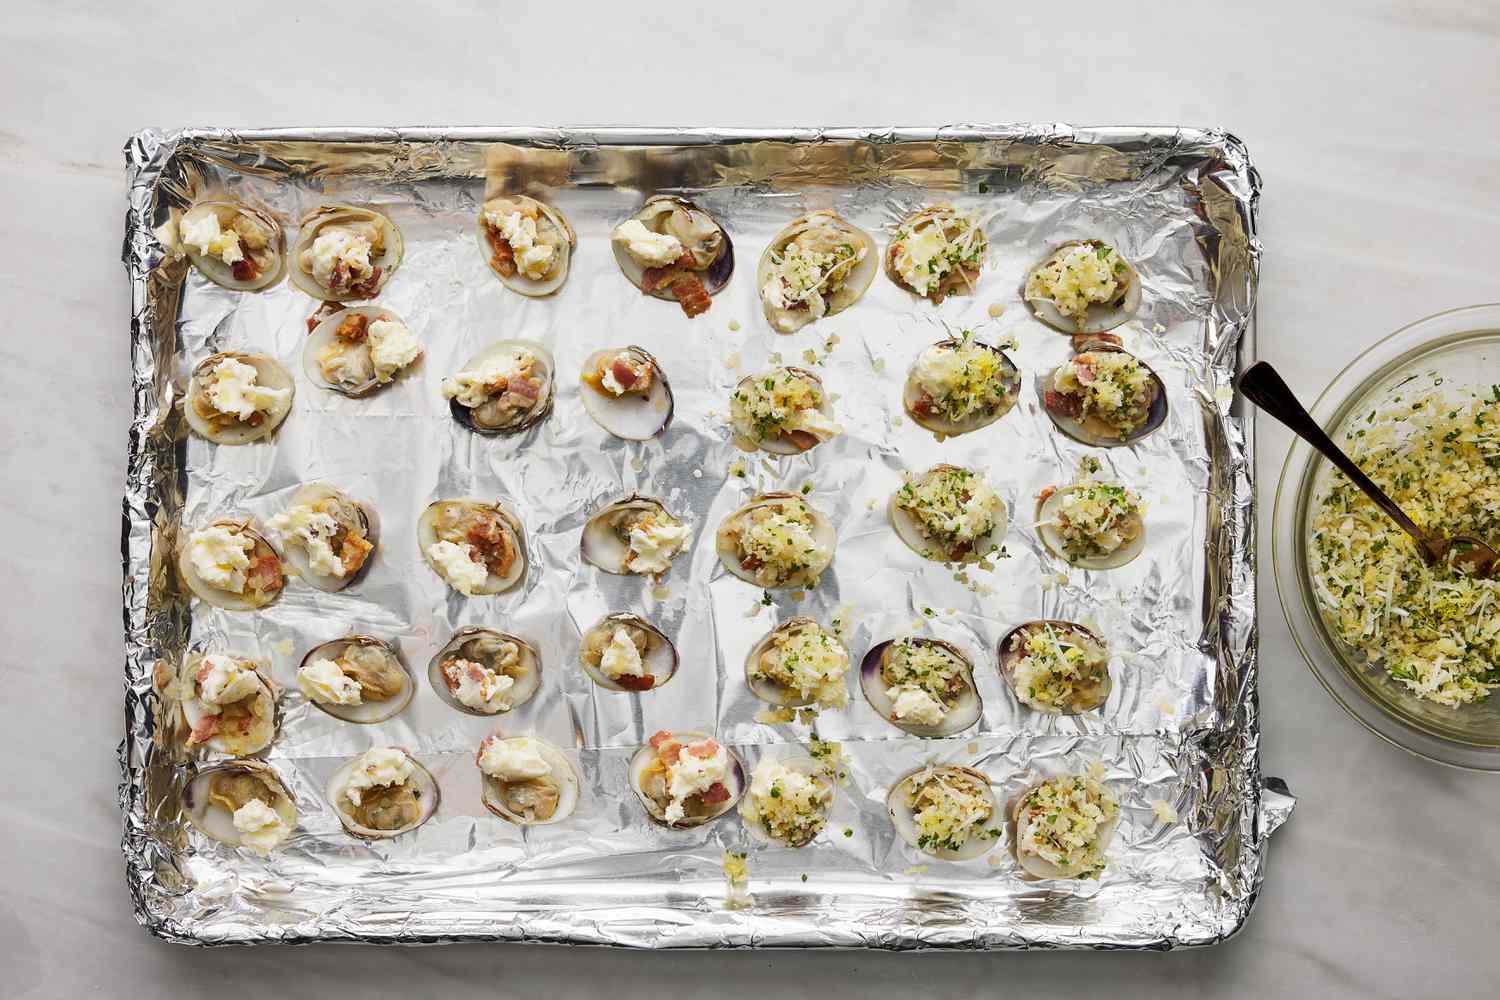 panko mixture placed on top of buttered opened clams on baking sheet